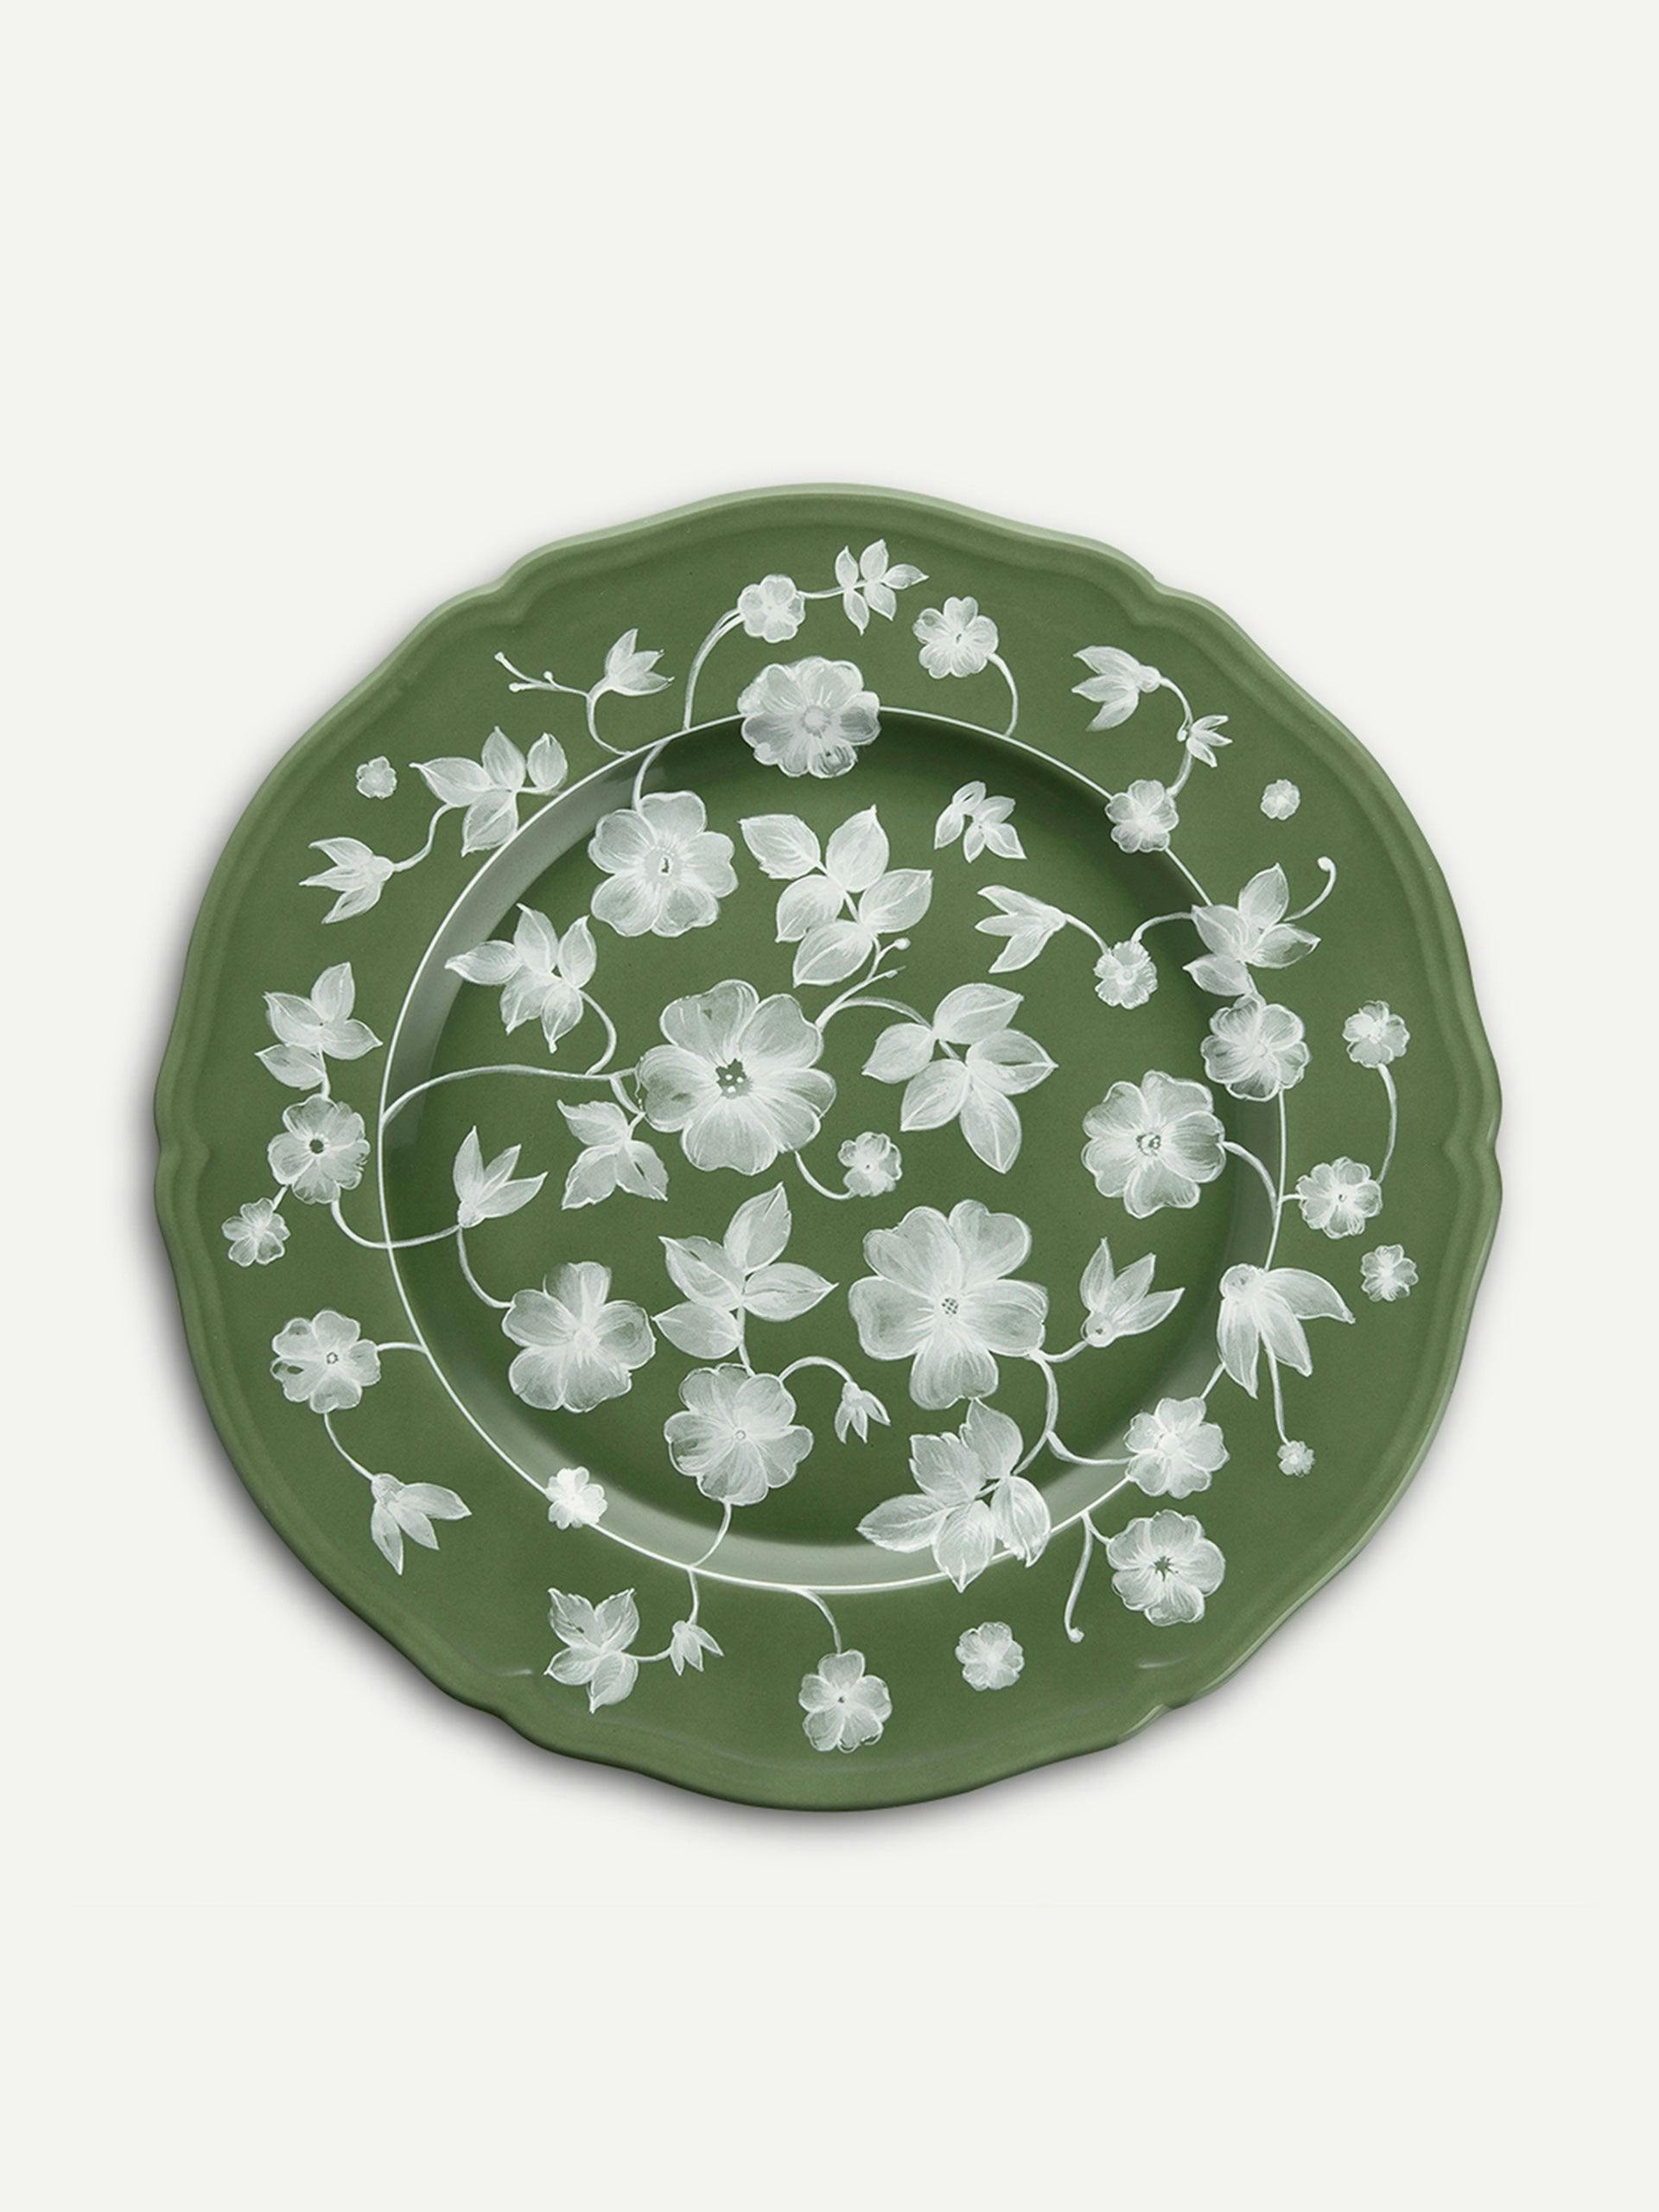 Green charger plate